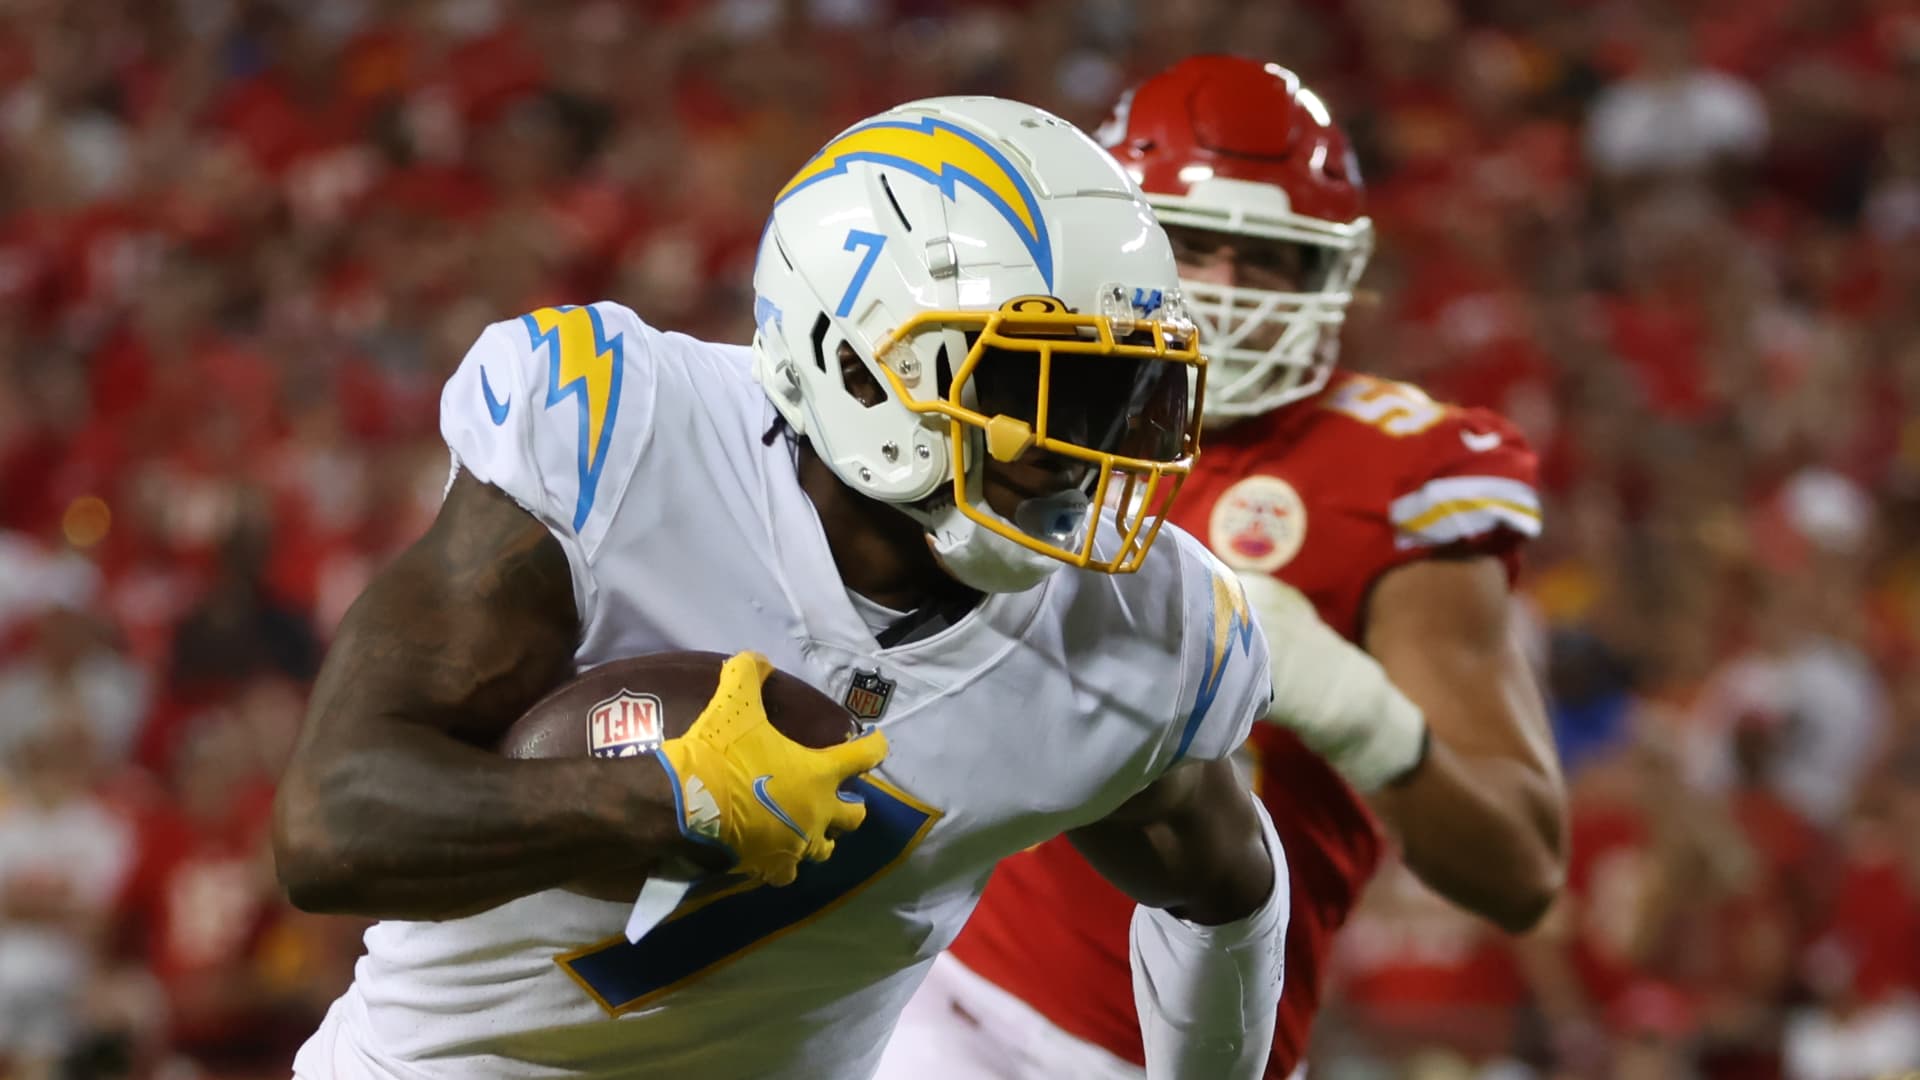 chargers chiefs amazon